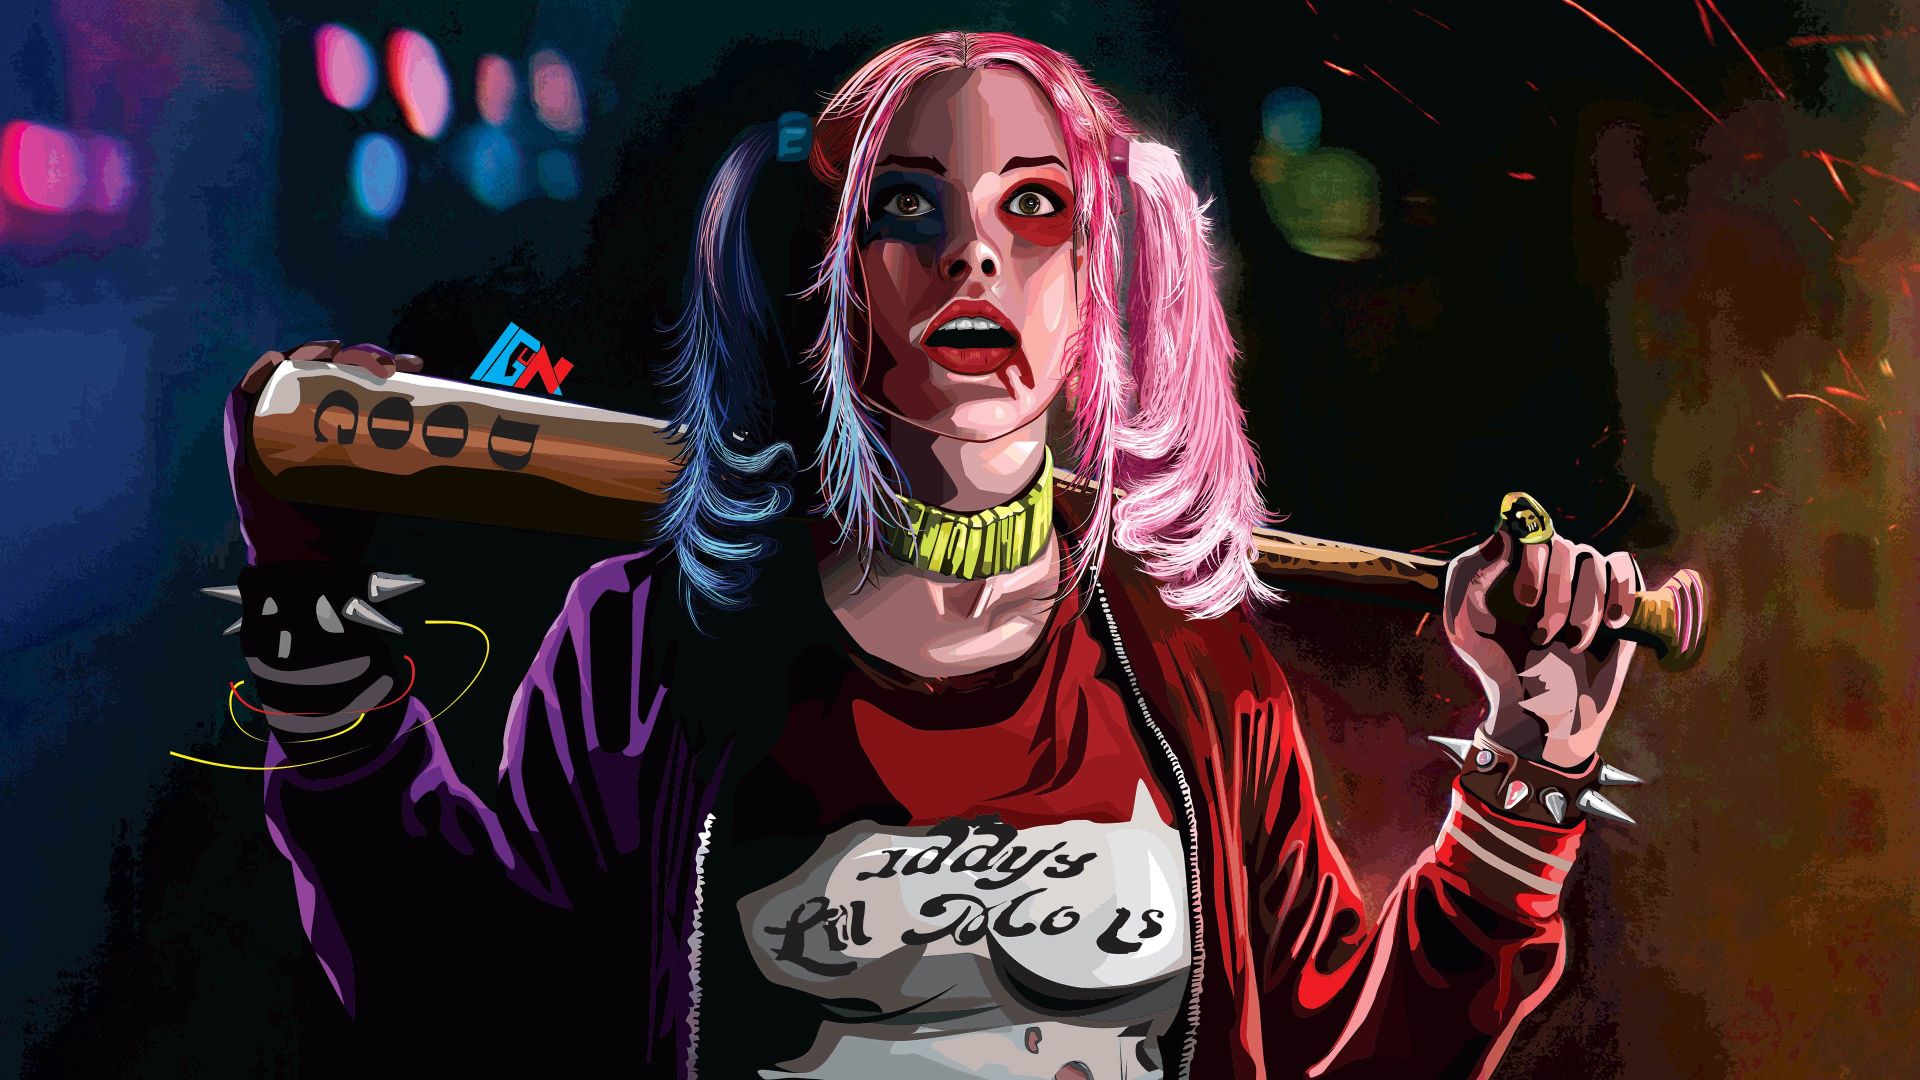 26 Suicide Squad Harley Quinn Wallpapers - Harley Quinn Wallpaper For Pc -  1920x1080 Wallpaper 